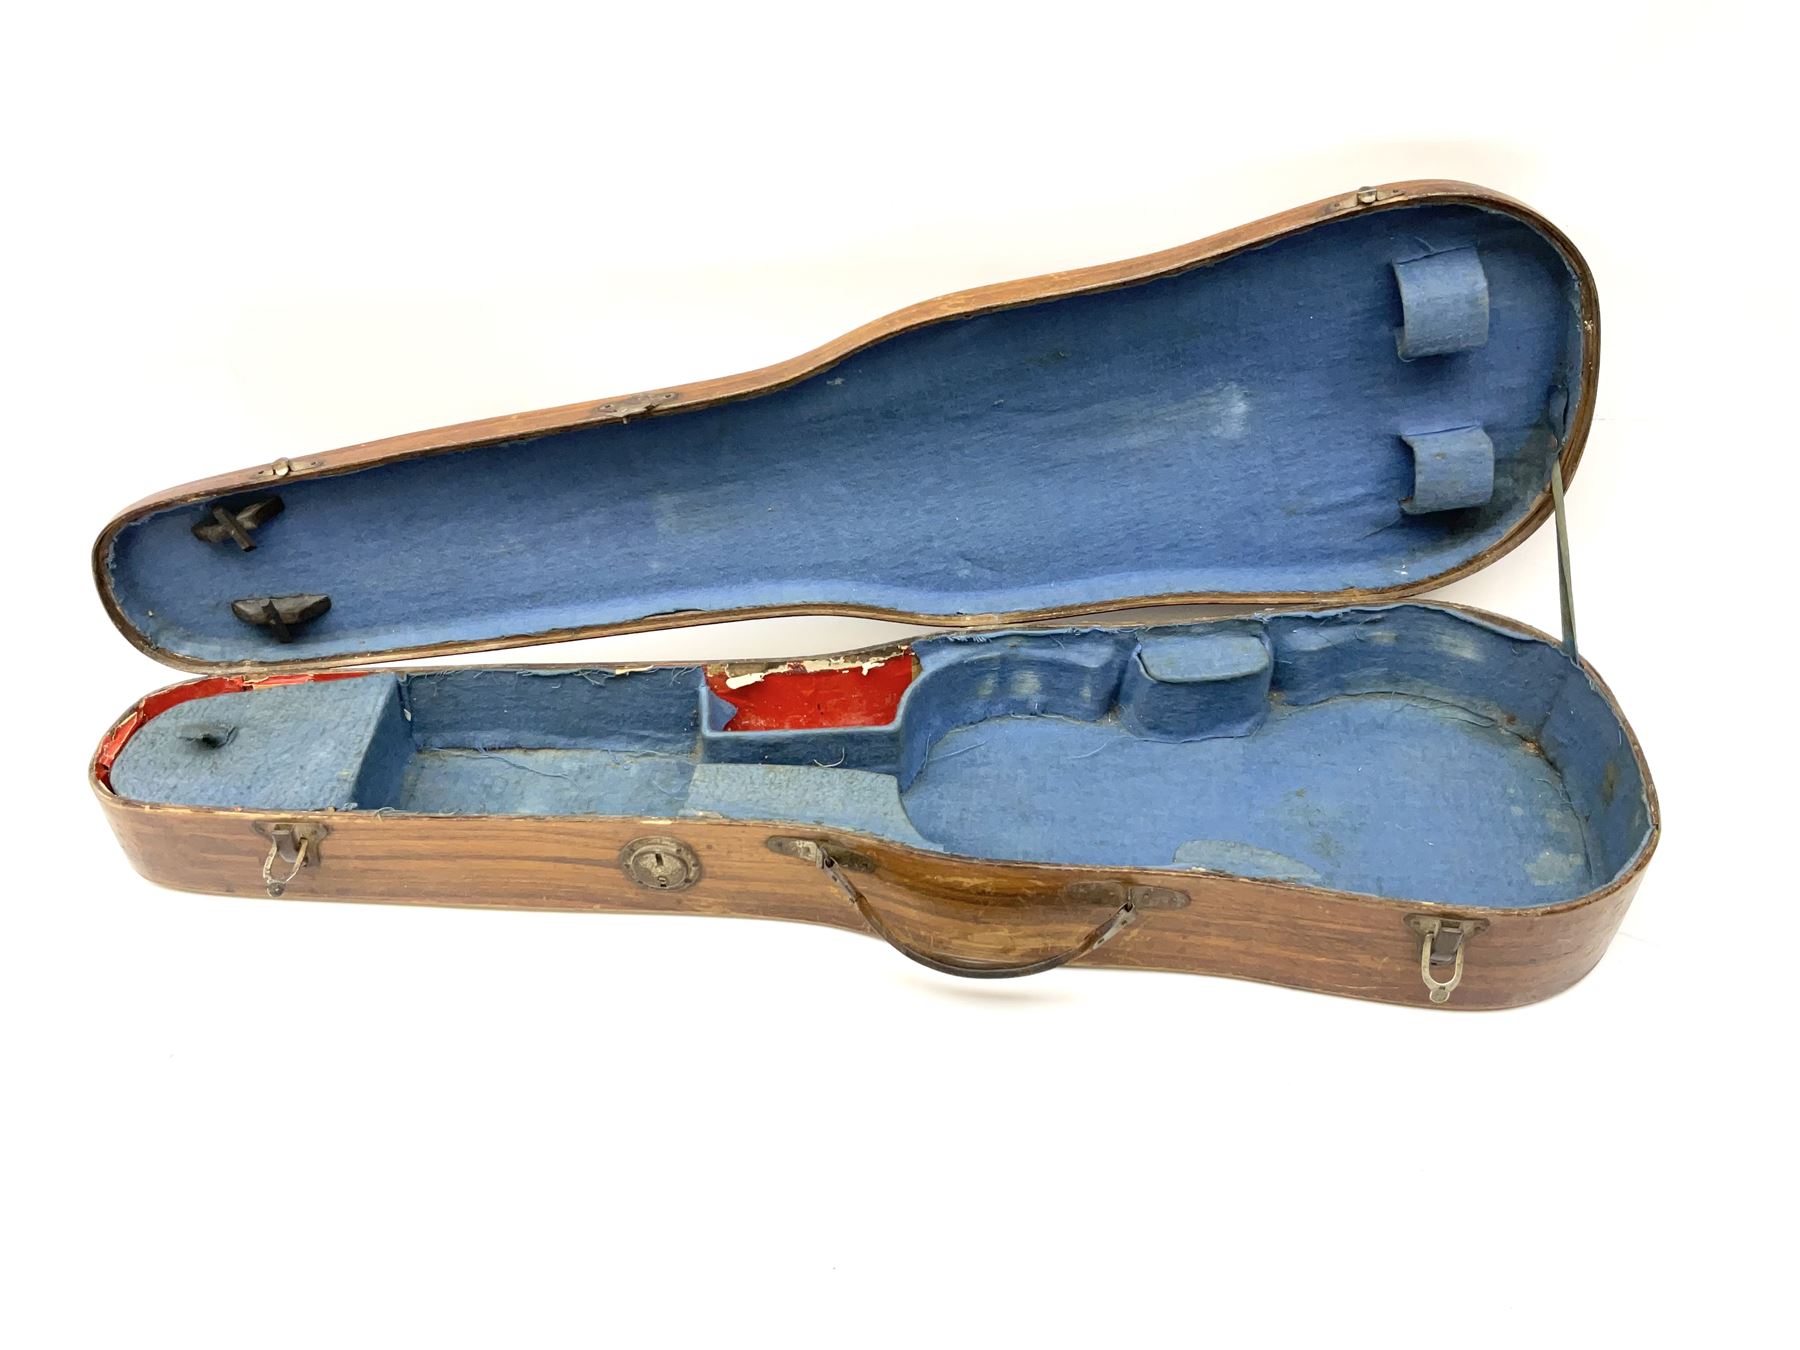 French Medio Fino violin c1920 for restoration and completion with 36cm two-piece maple back and rib - Image 19 of 20